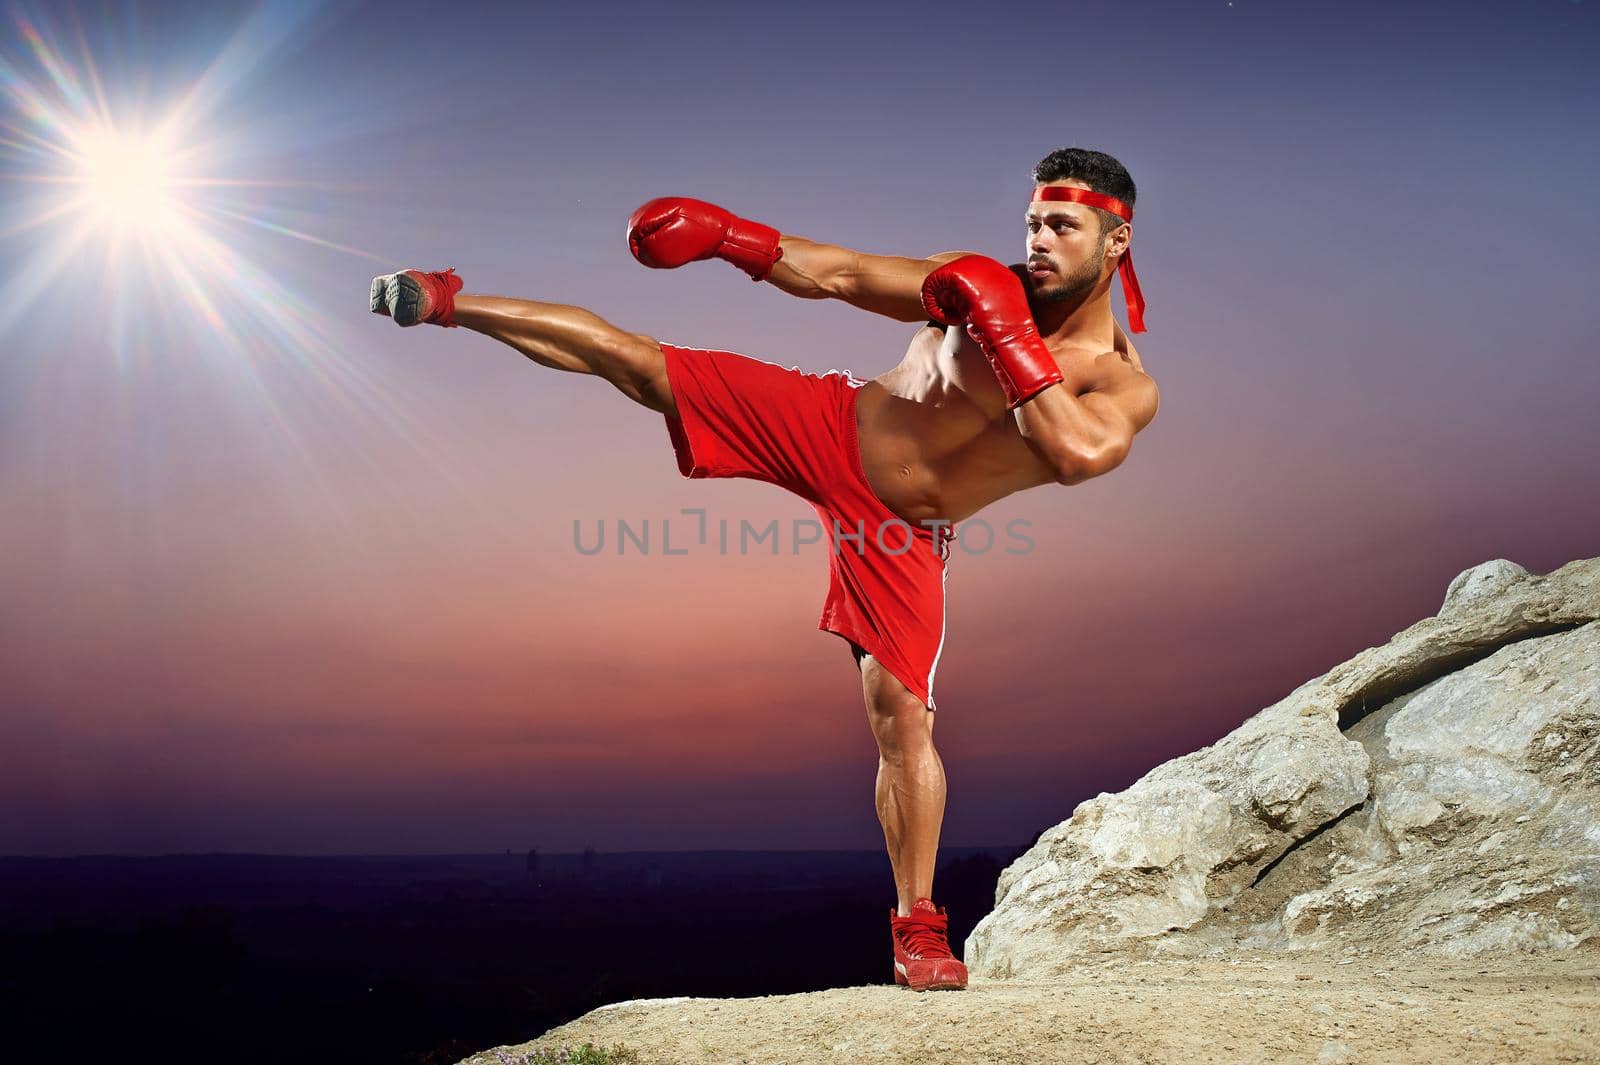 Boxer in training on the hillside at sunset, evening workouts, side kick, red boxing gloves, red boxing form,man with a naked torso, muscles, developed muscles, muscular body, athlete. by SerhiiBobyk